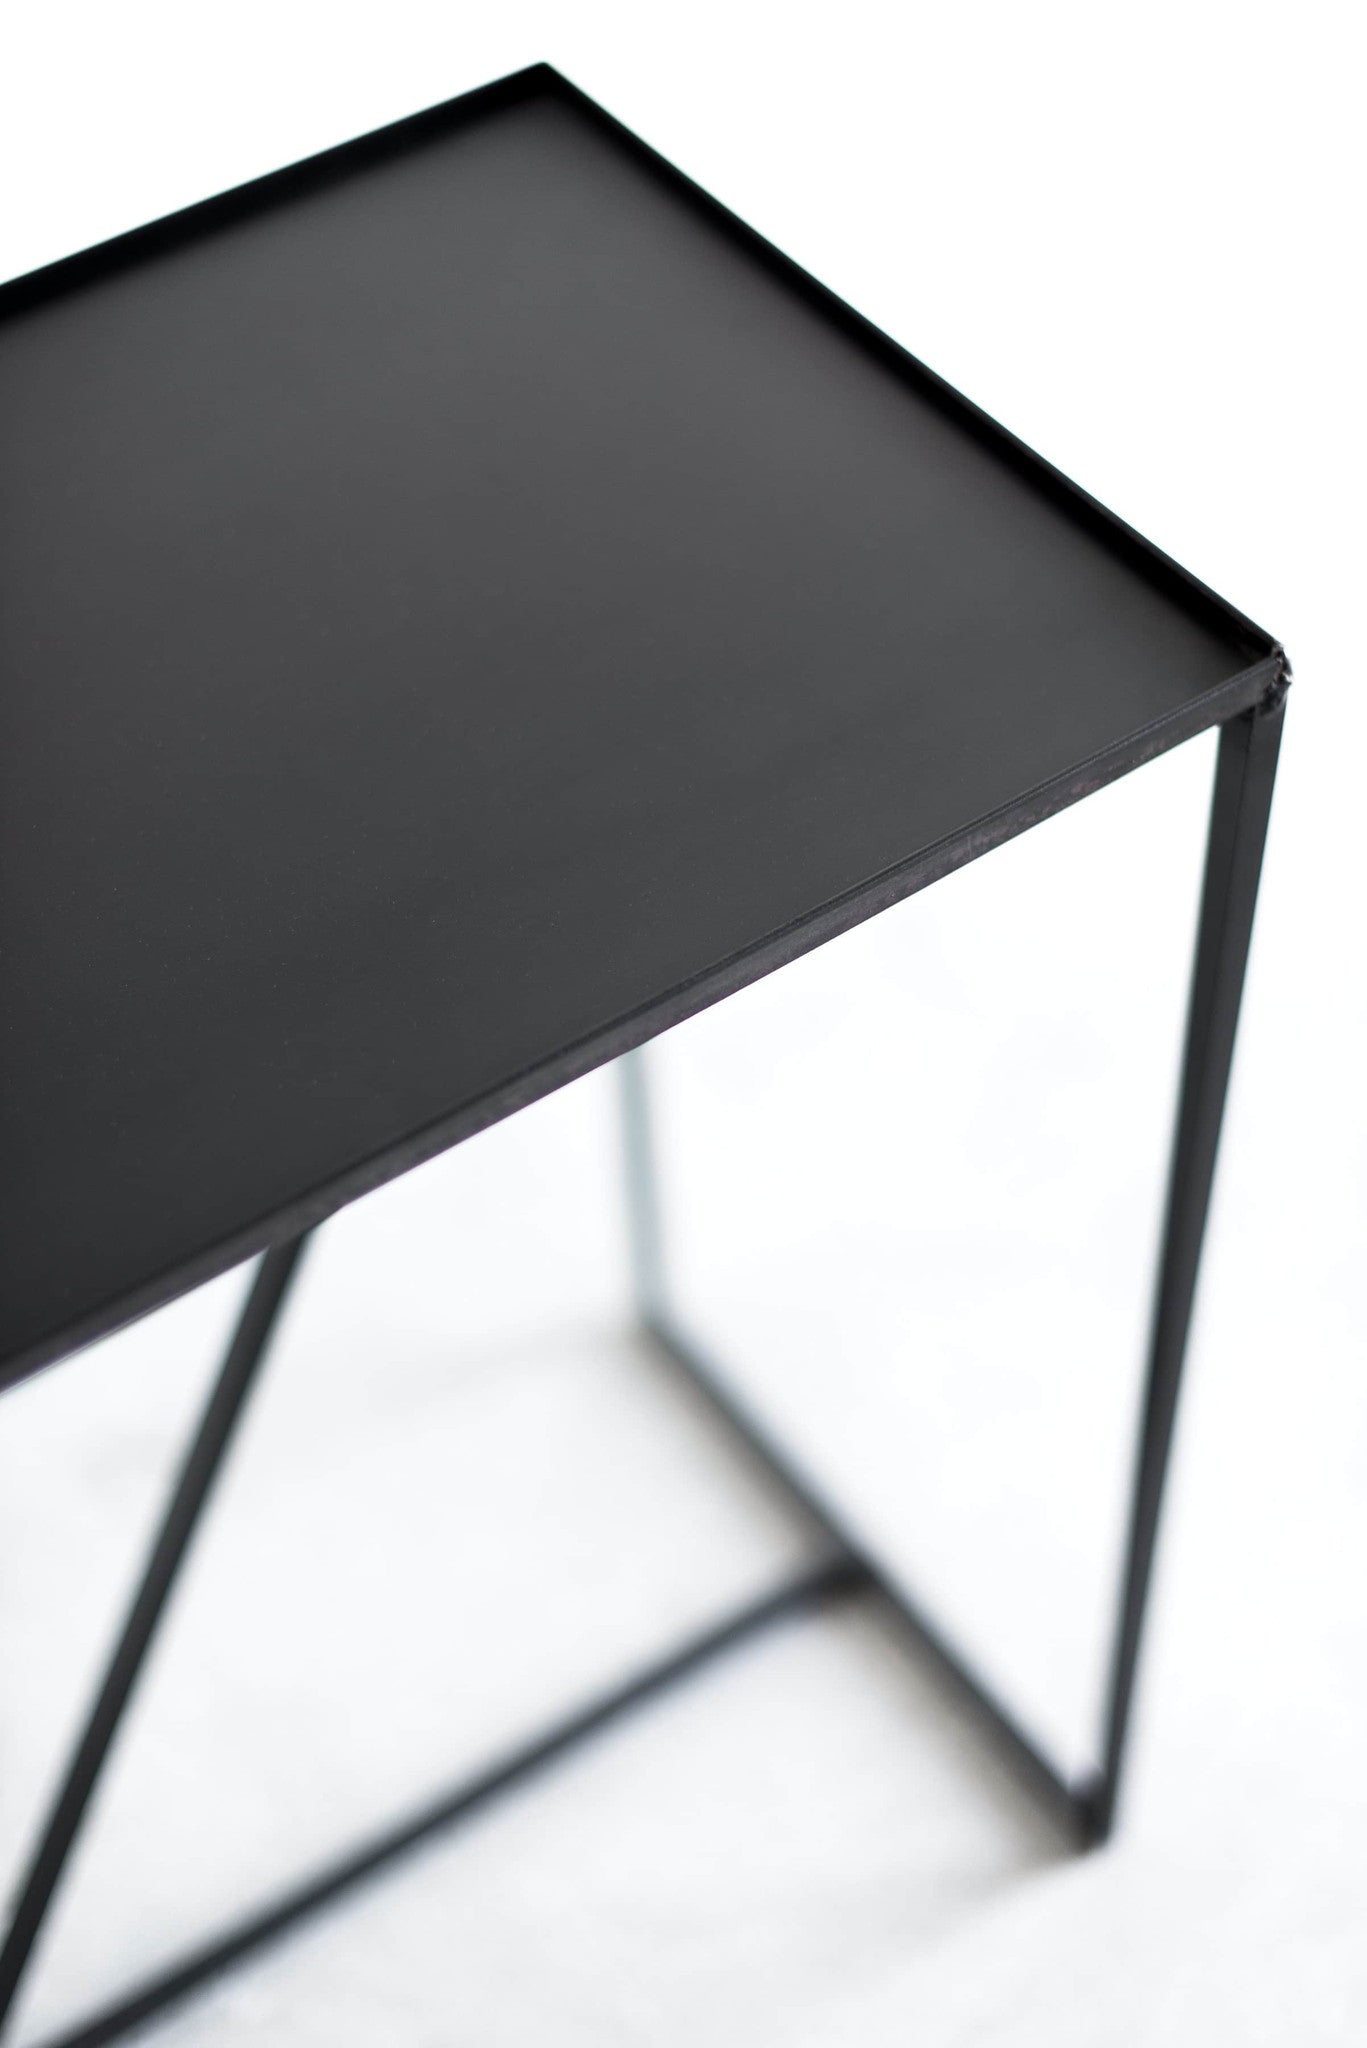 Arden Console steel table top view